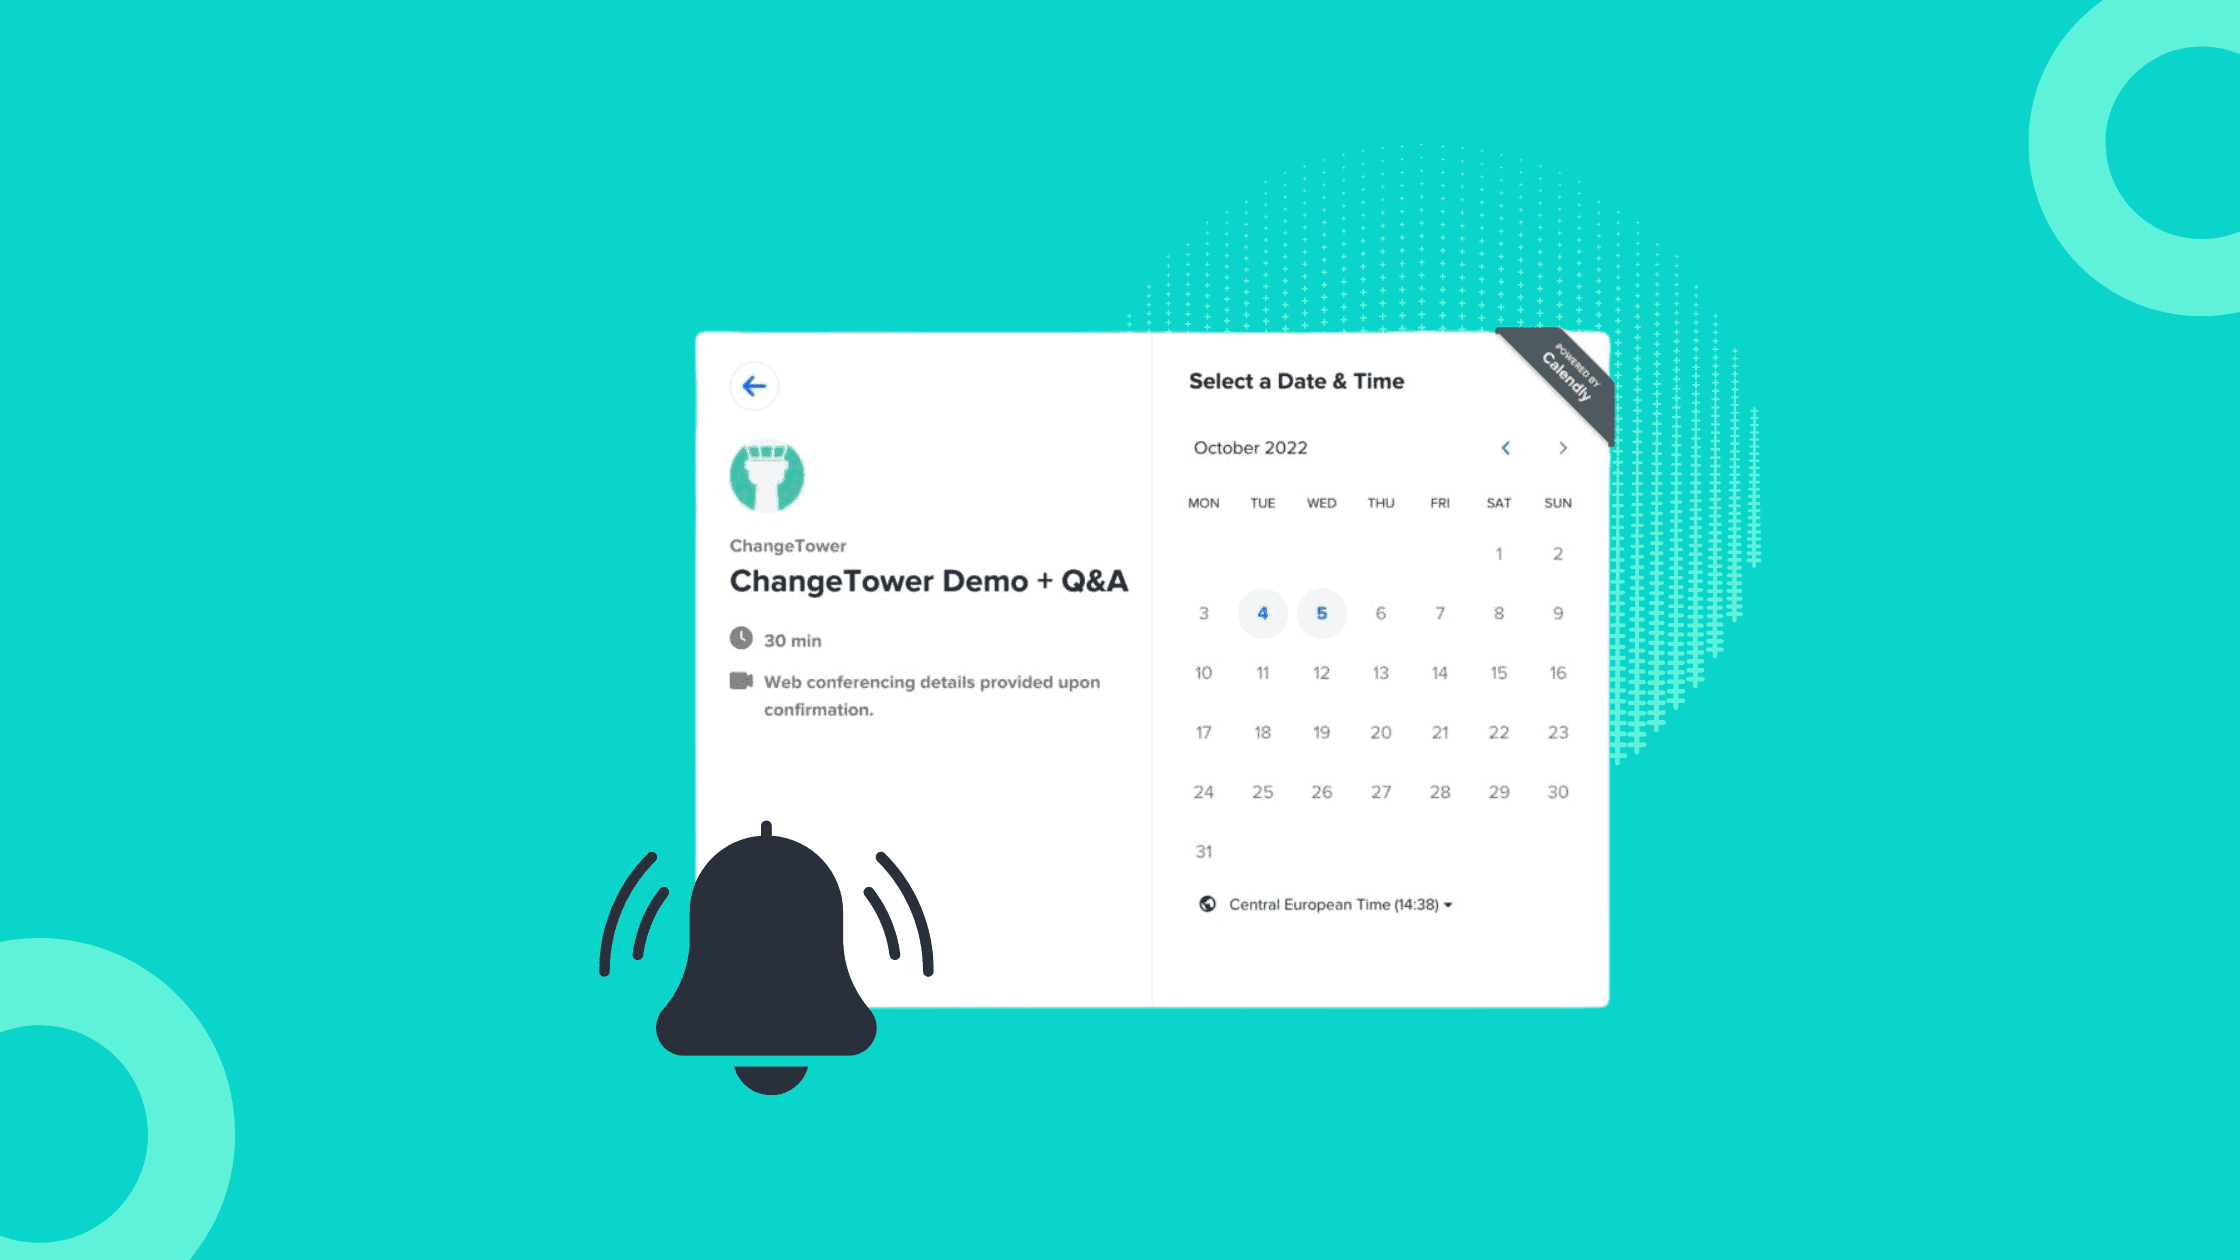 Tracking Calendly Appointment Availability - Monitor Notification